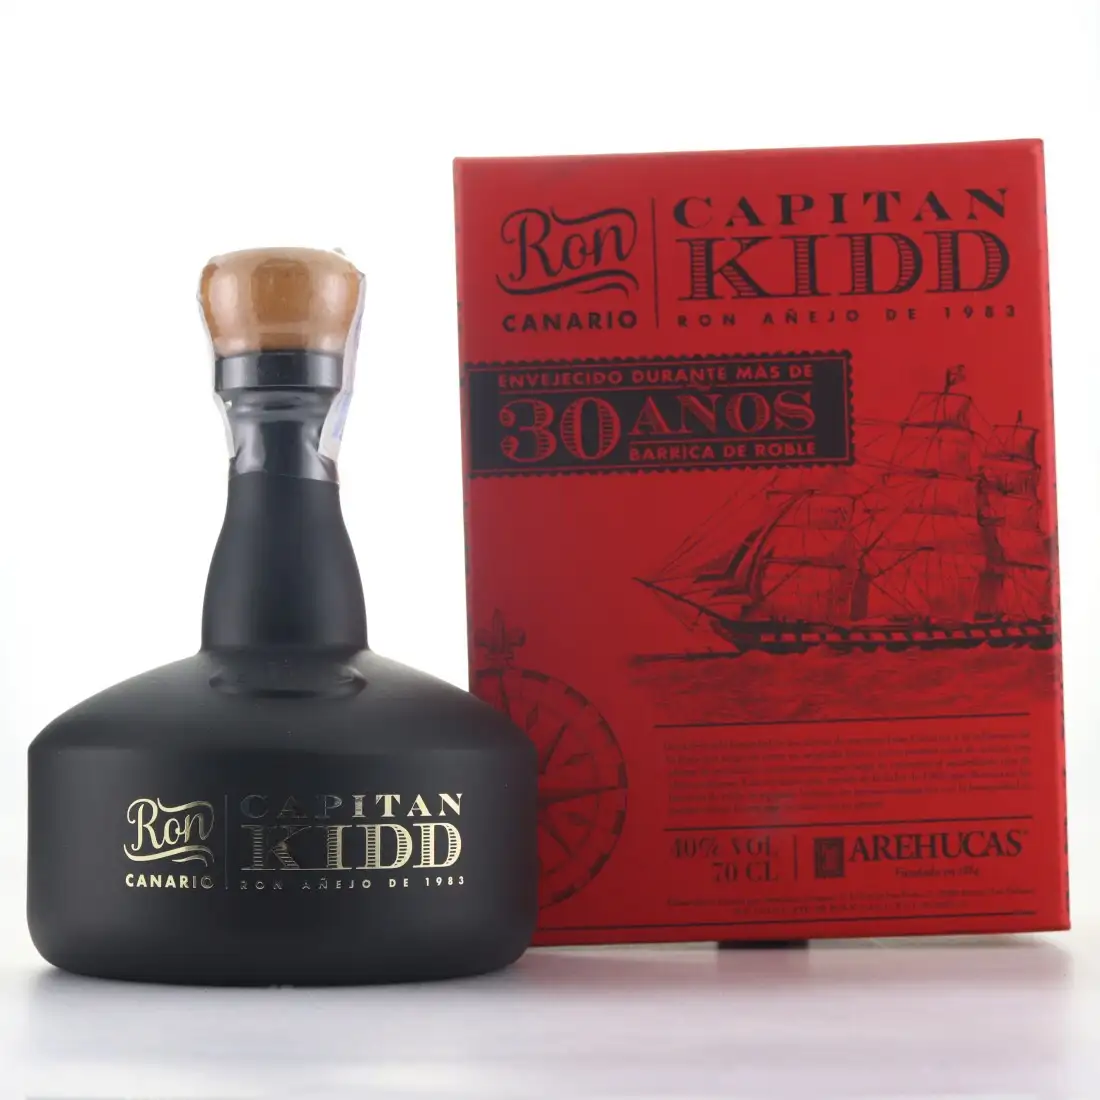 Image of the front of the bottle of the rum Captain Kidd